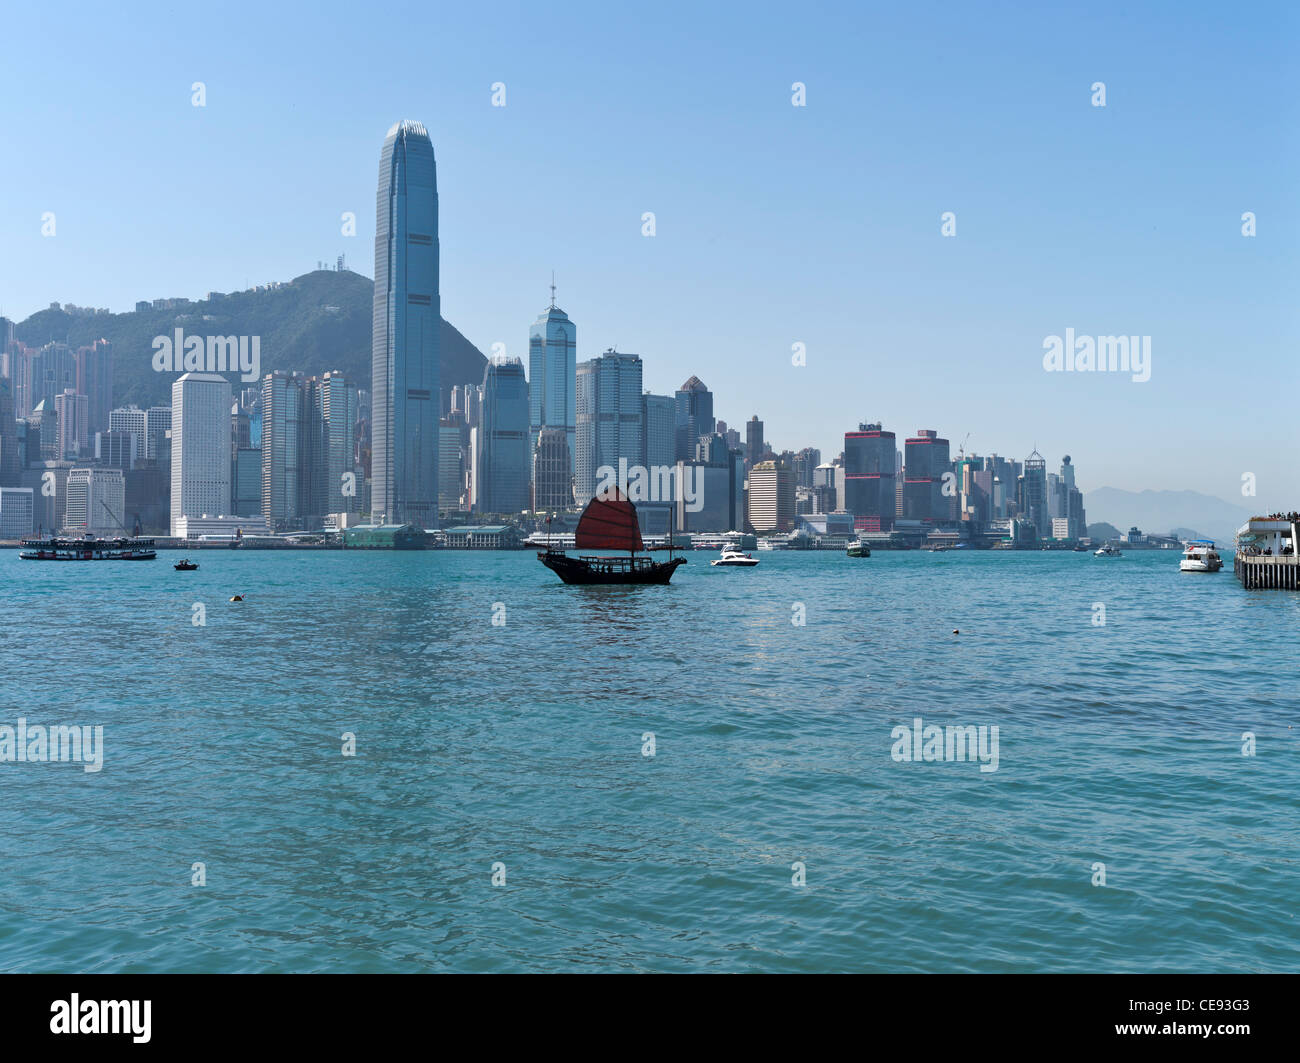 dh Hong Kong Harbour CENTRAL HONG KONG Red Sail Junk Harbour Waterfront IFC Skyline Dayboot victoria Harbour Day Junkboat china Ship Stockfoto